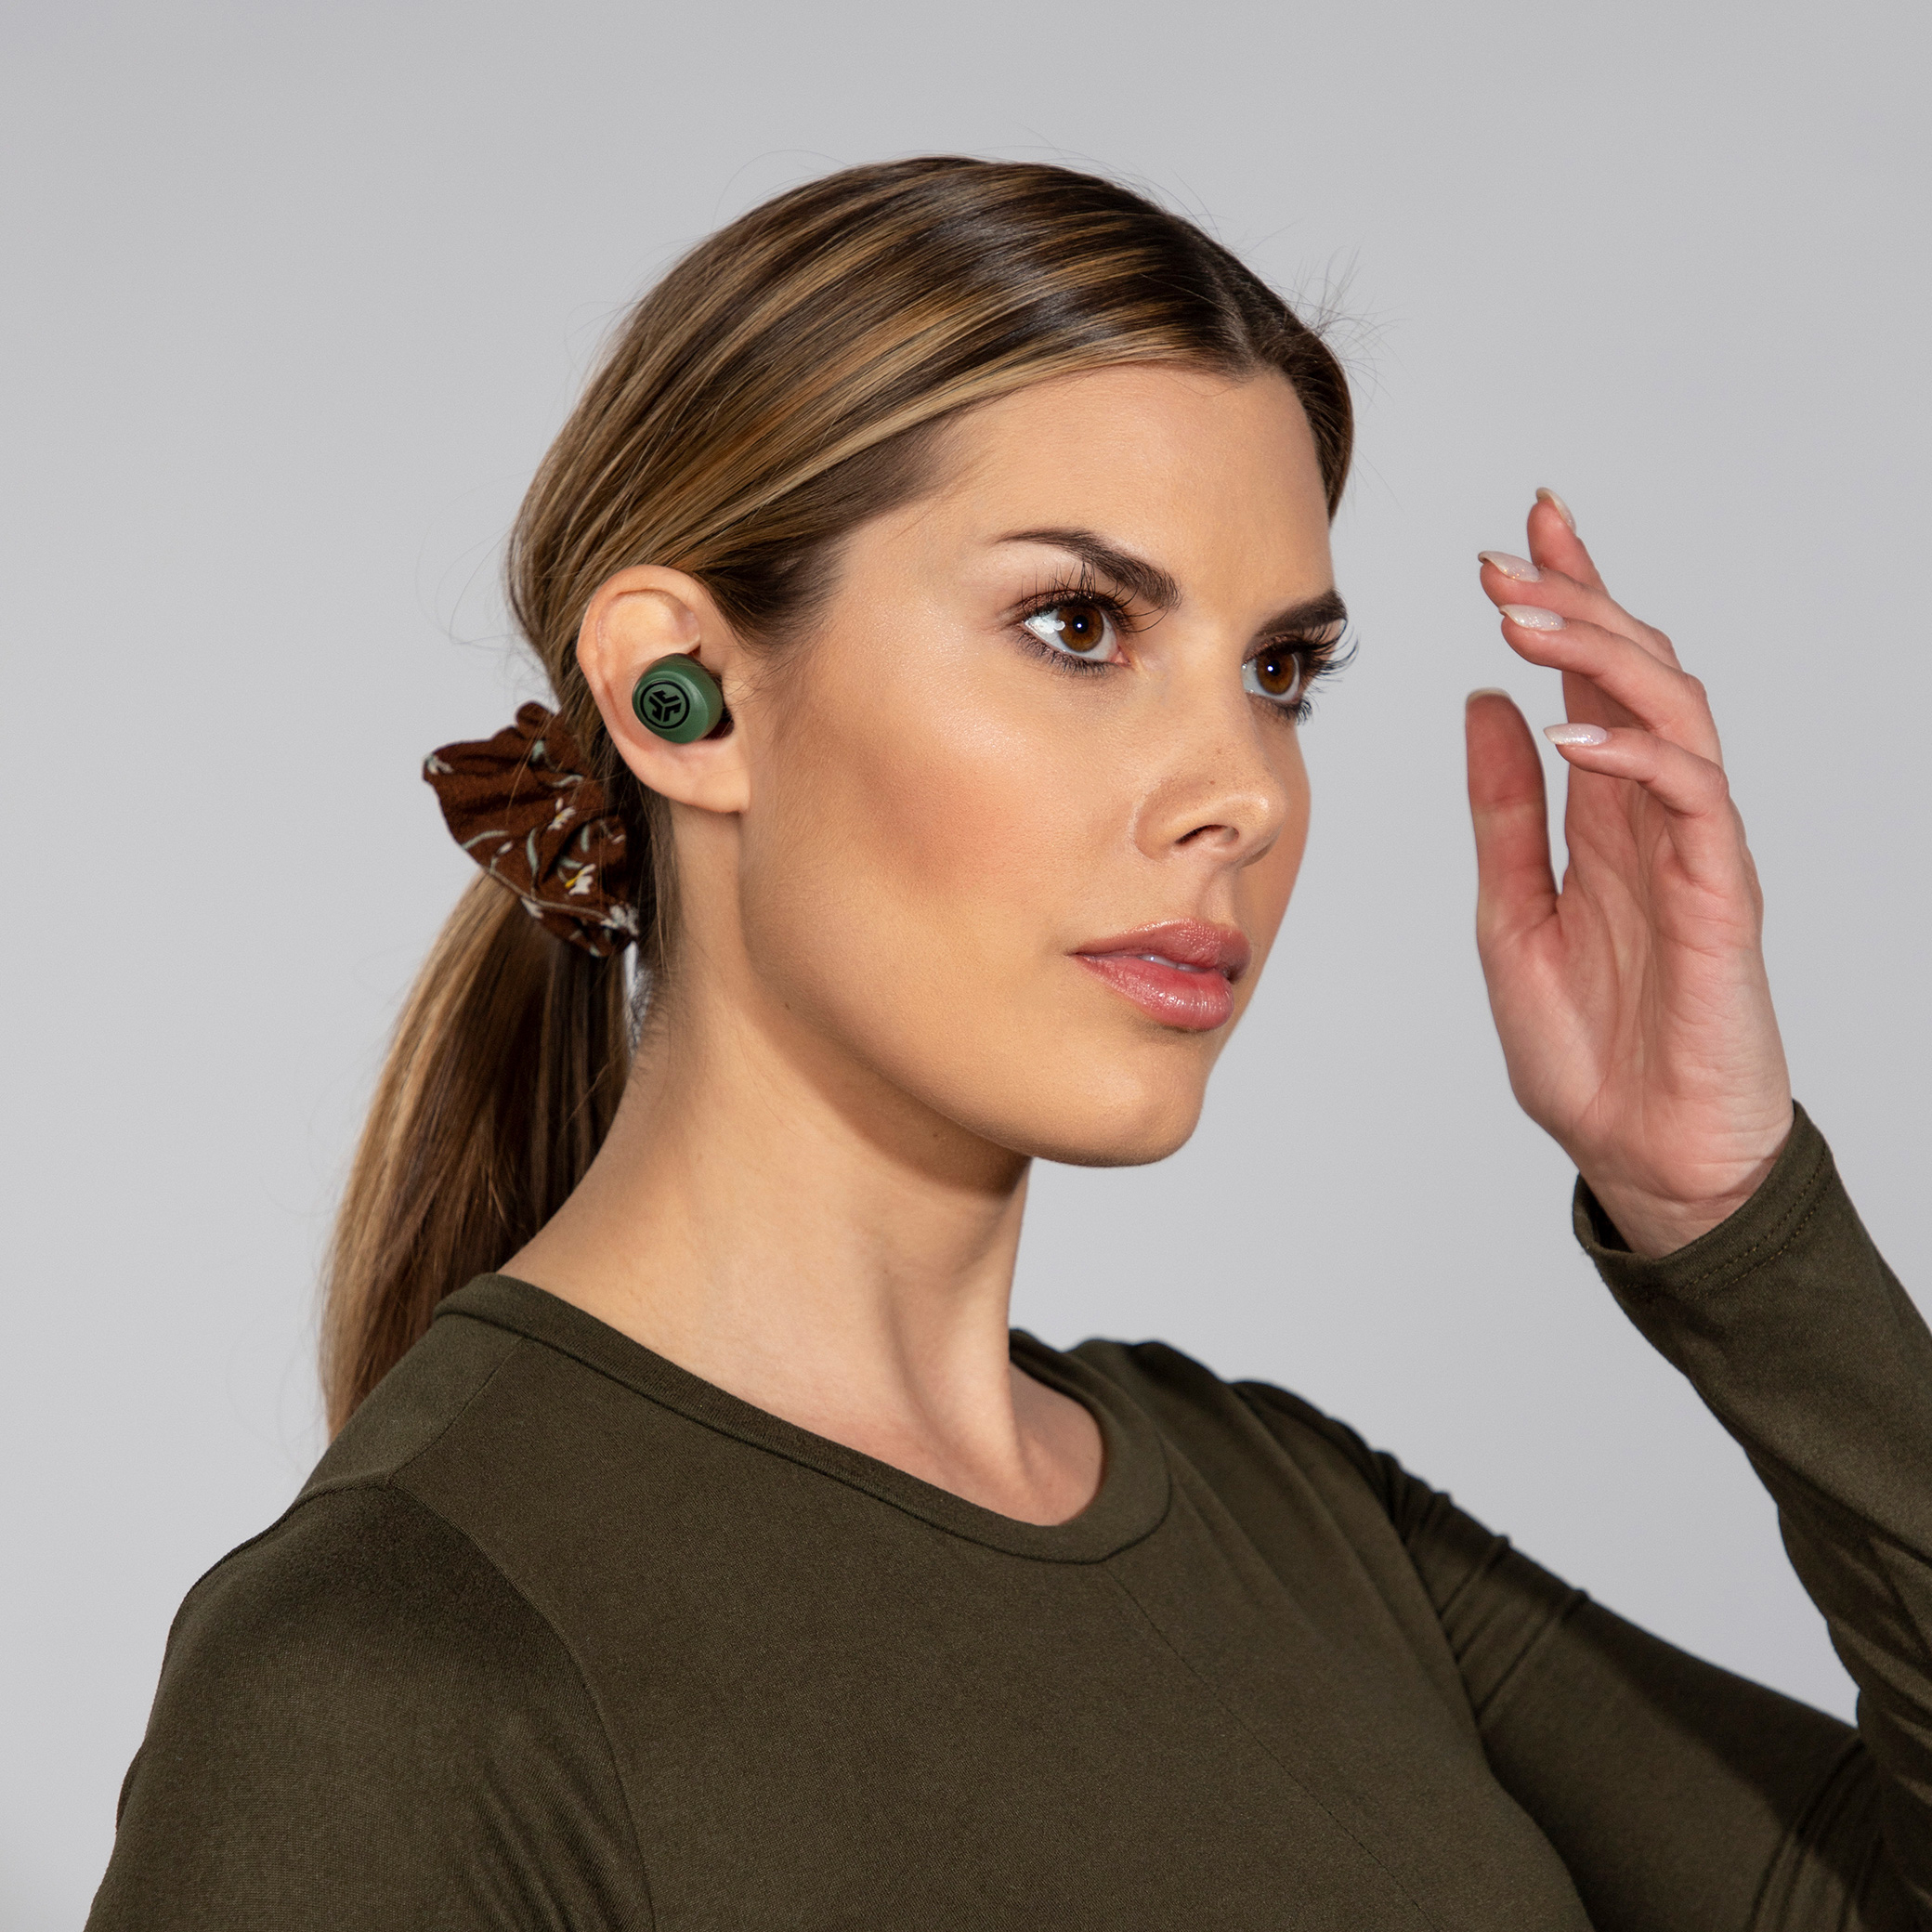 JLab Audio Go Air True Wireless Earbuds + Charging Case, Army Green, Dual Connect, IP44 Sweat Resistance, Bluetooth 5.0 Connection, 3 EQ Sound Settings: JLab Signature, Balanced, Bass Boost - image 2 of 7